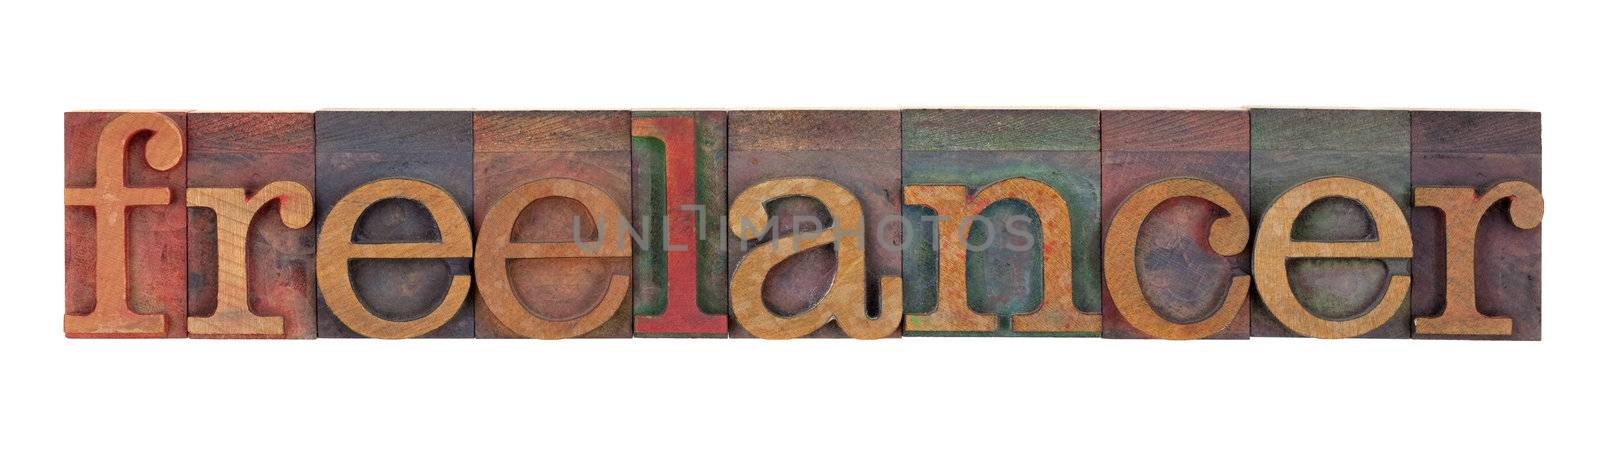 freelancer - word in vintage wood letterpress type blocks stained by color inks, isolated on white